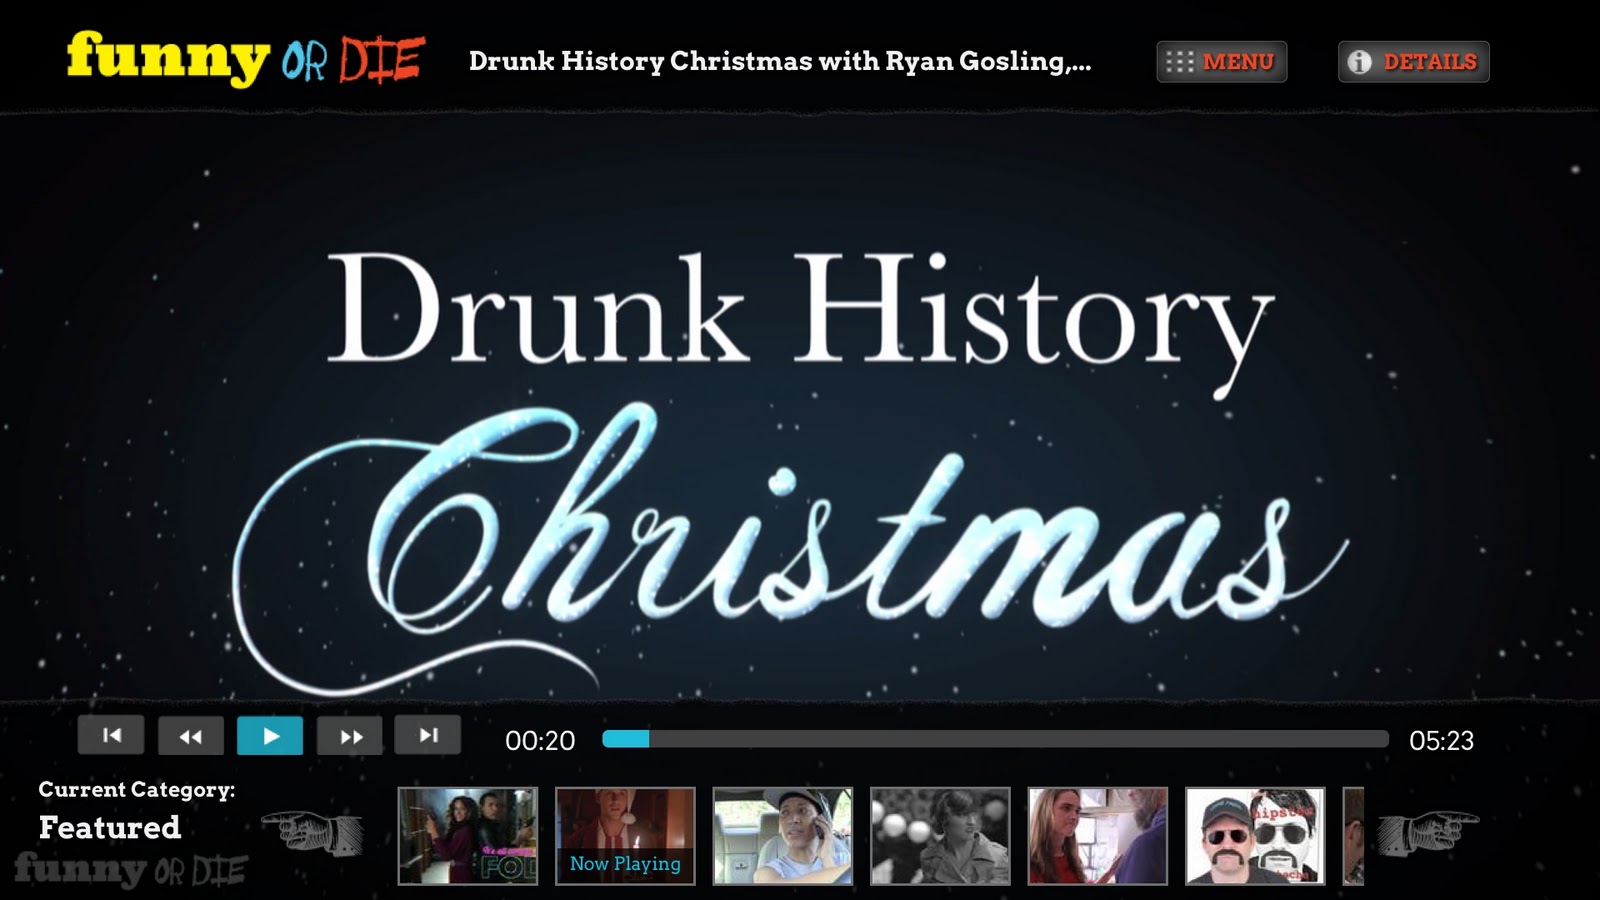 Google TV adds 'Funny Or Die' content with new app